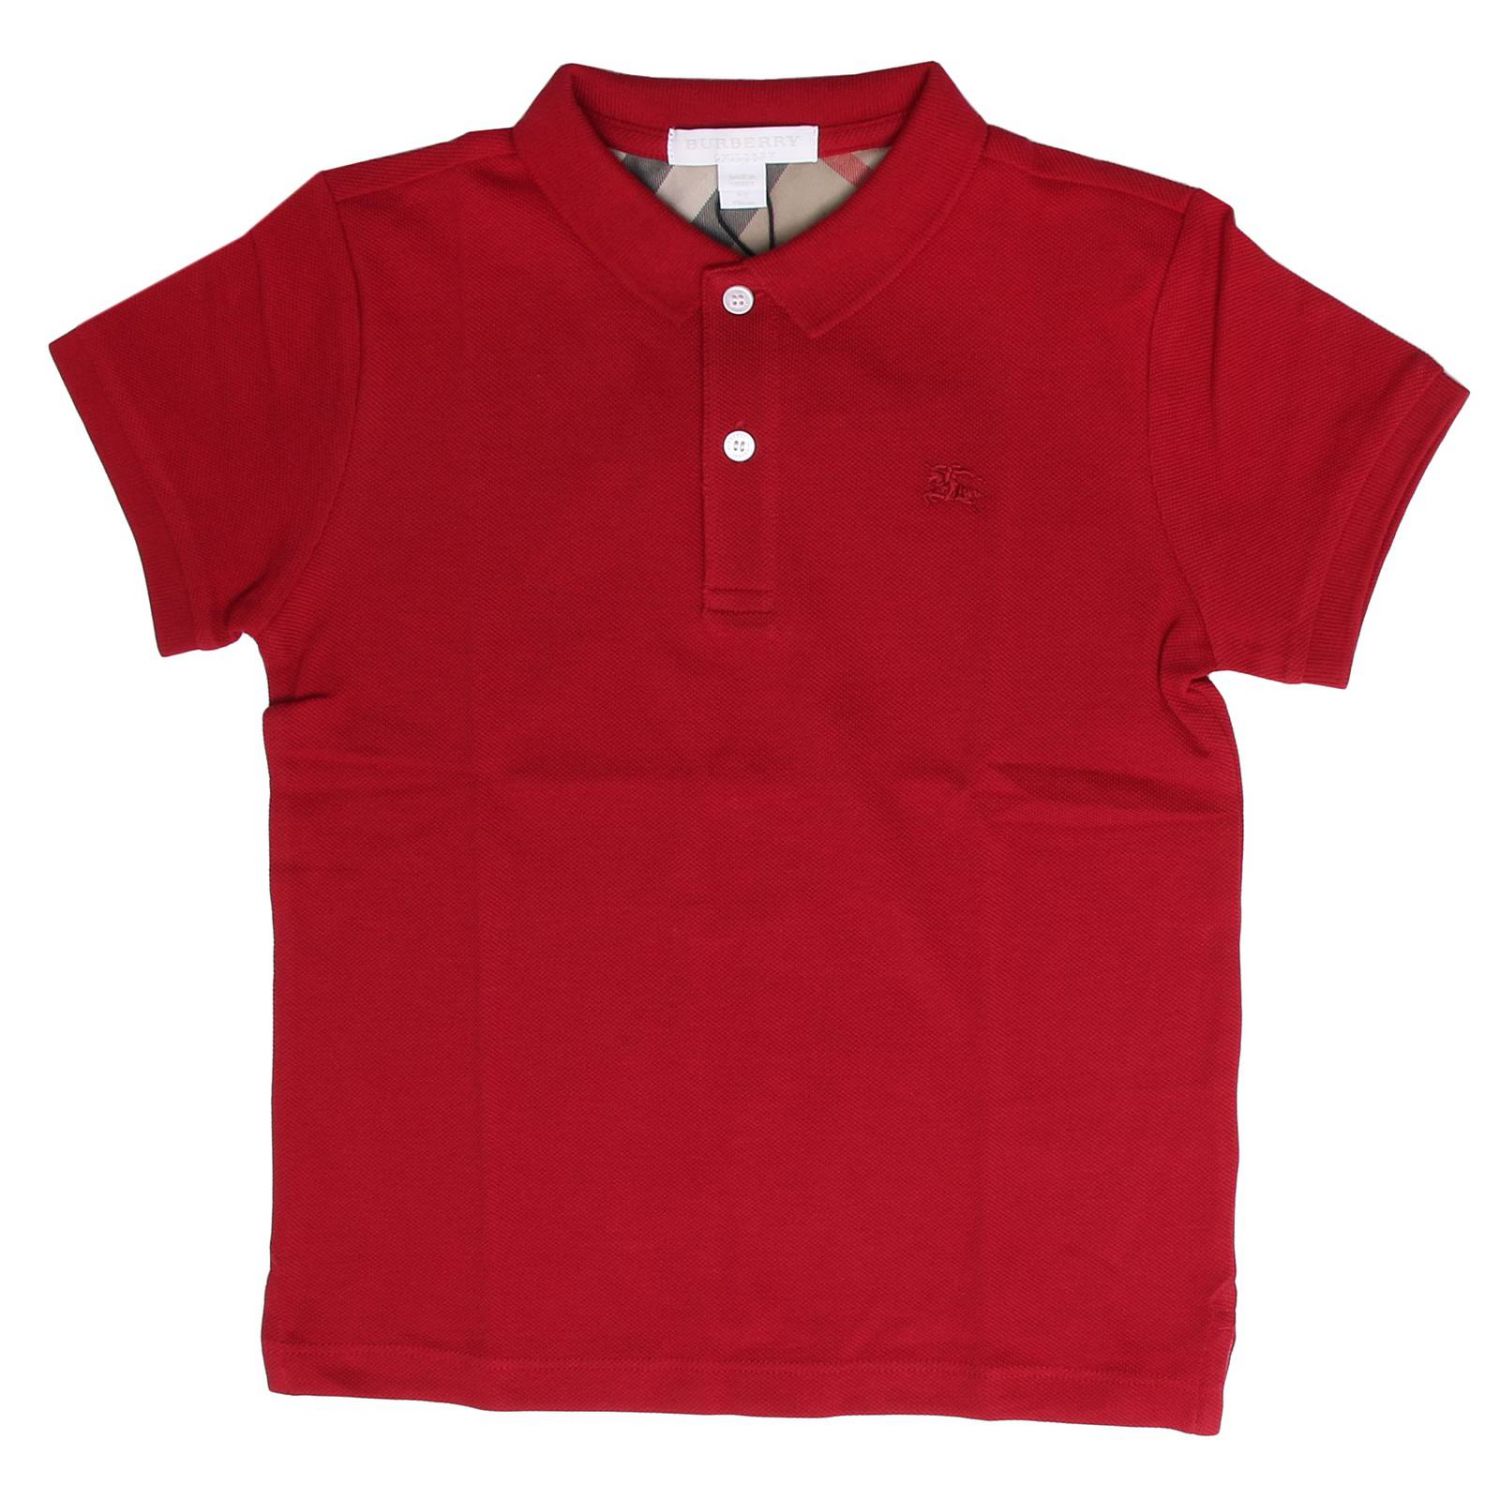 Burberry Outlet: T-shirt kids - Red | T-Shirt Burberry 3946694 GIGLIO.COM